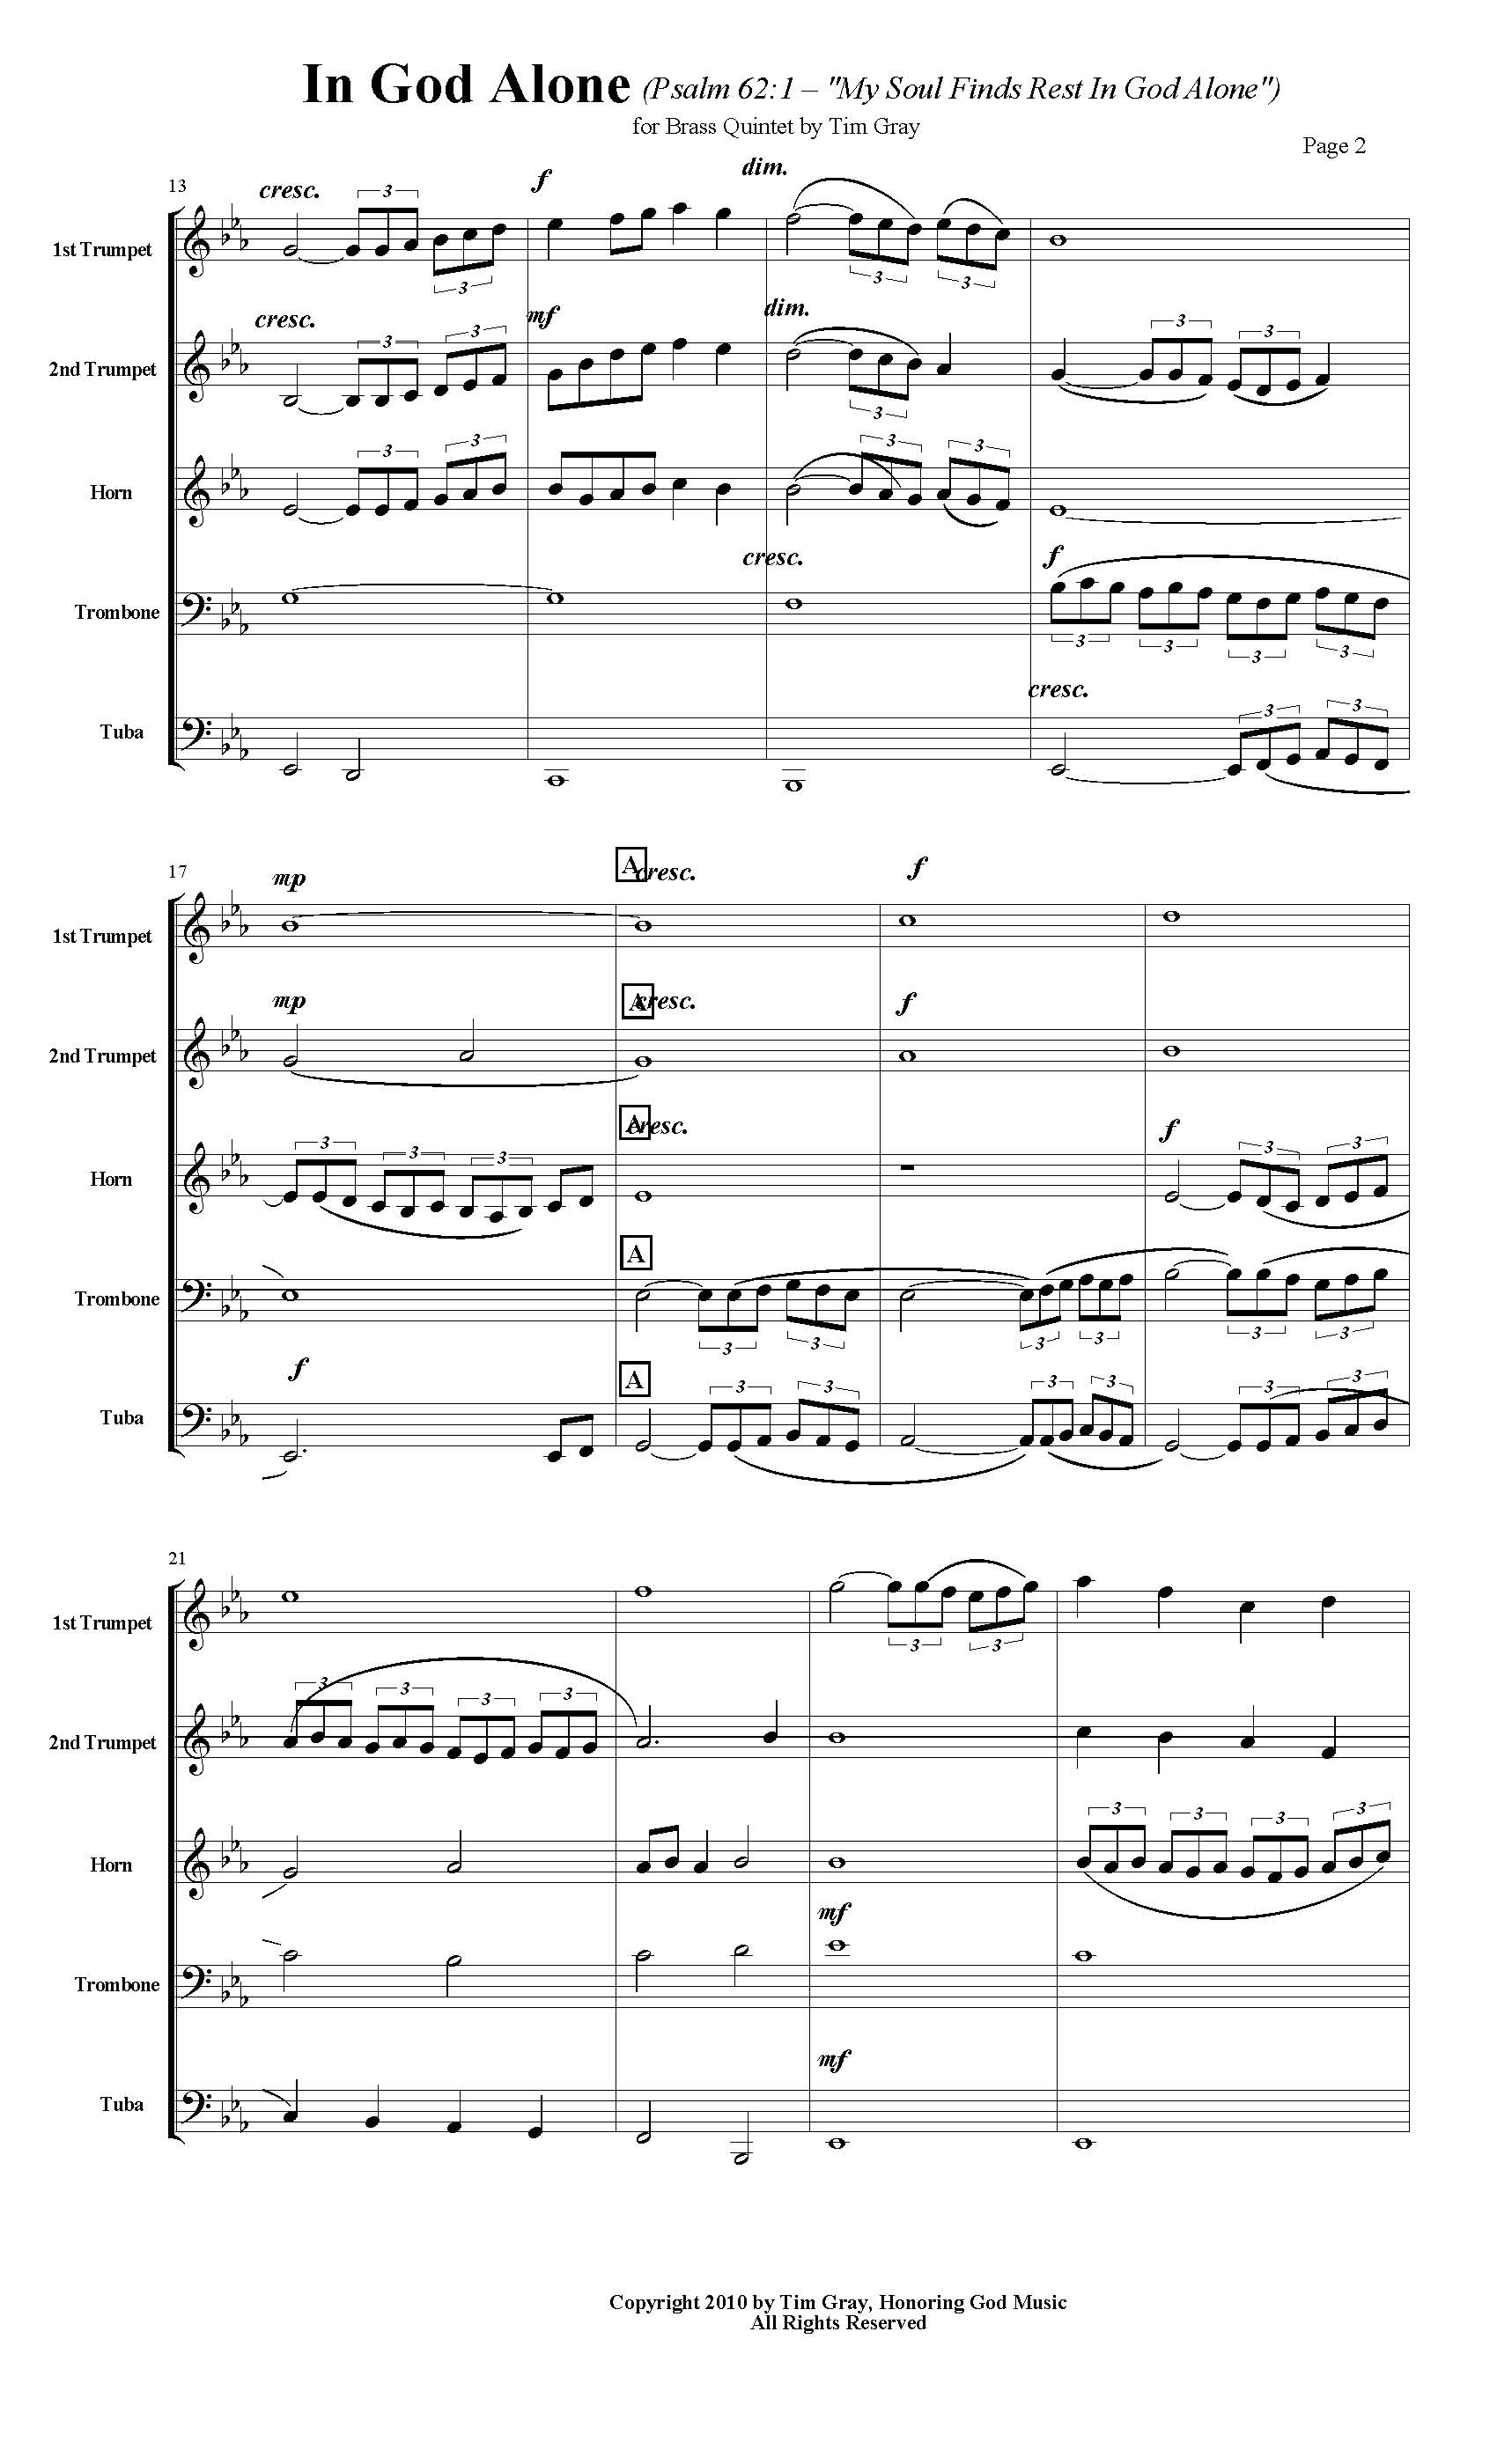 In God Alone - Psalm 62 Brass Quintet by Tim Gray sample page 2 at HonoringGodMusic.com